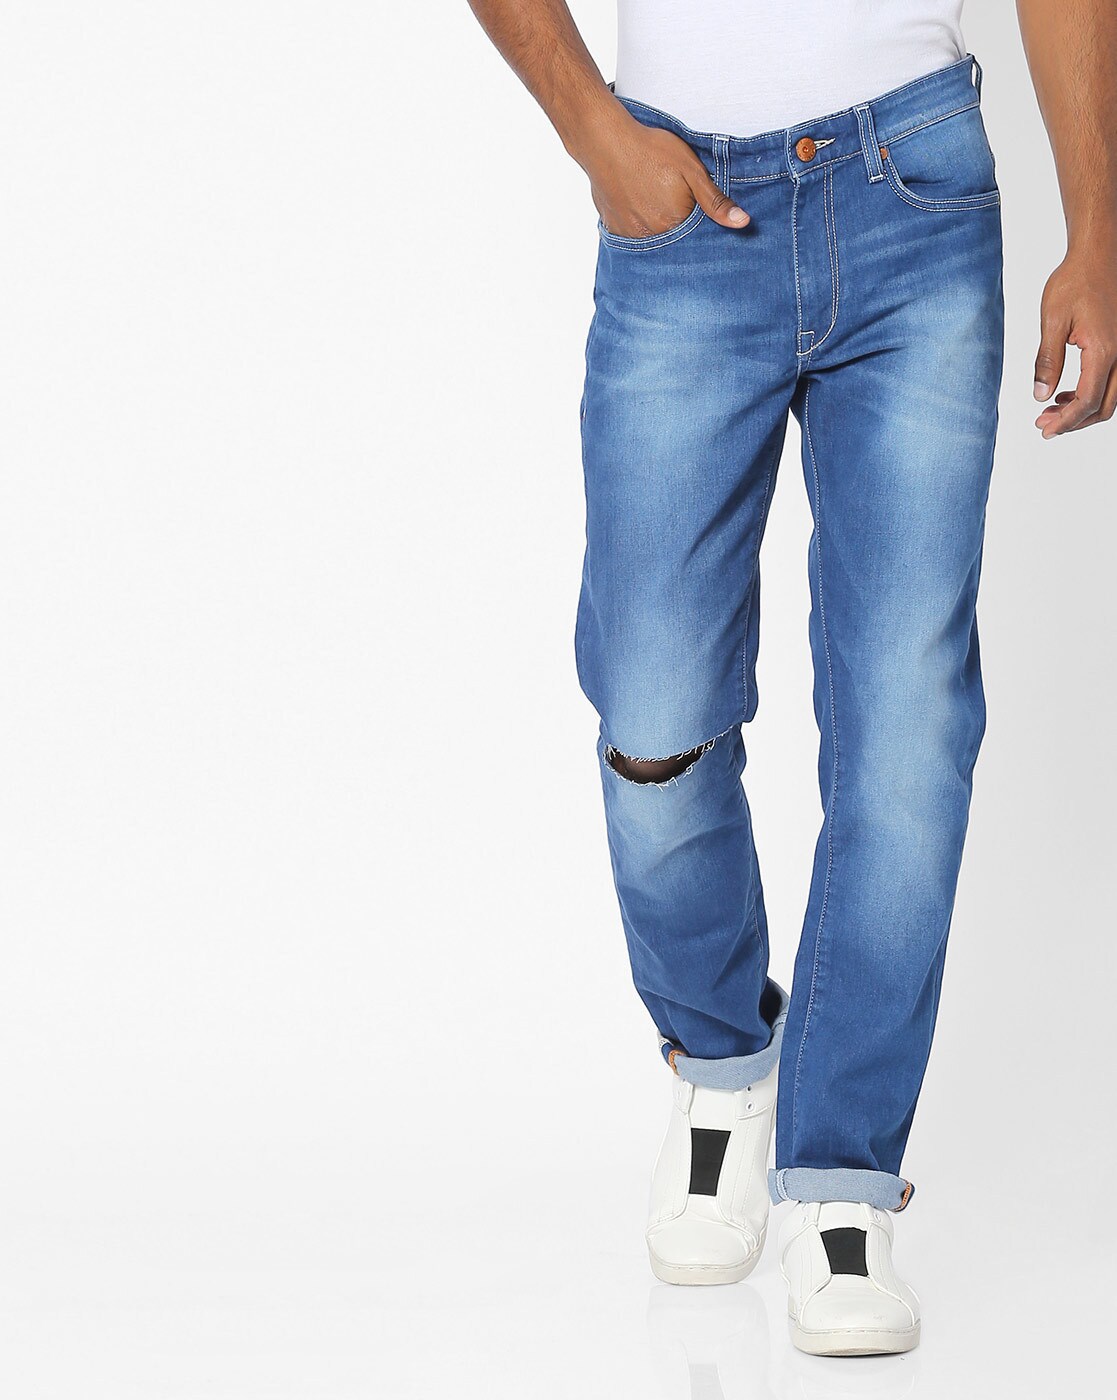 Buy Blue Trousers & Pants for Men by UNITED COLORS OF BENETTON